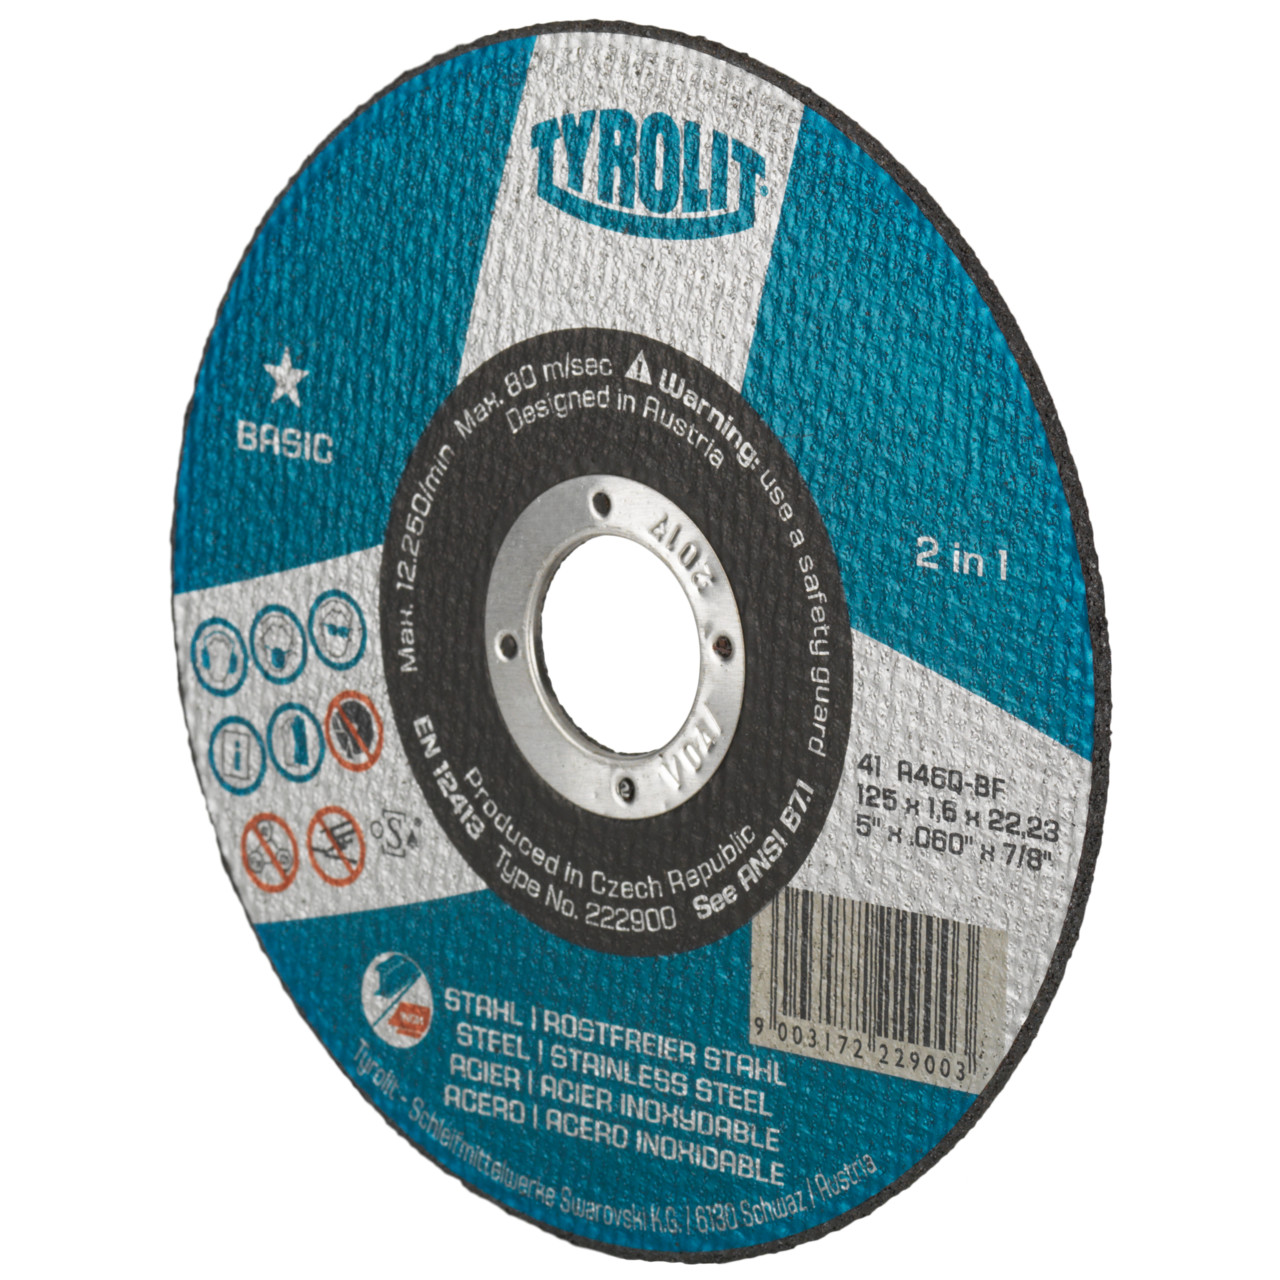 Tyrolit Cut-off wheels DxDxH 125x1.6x22.23 2in1 for steel and stainless steel, shape: 41 - straight version, Art. 34332873